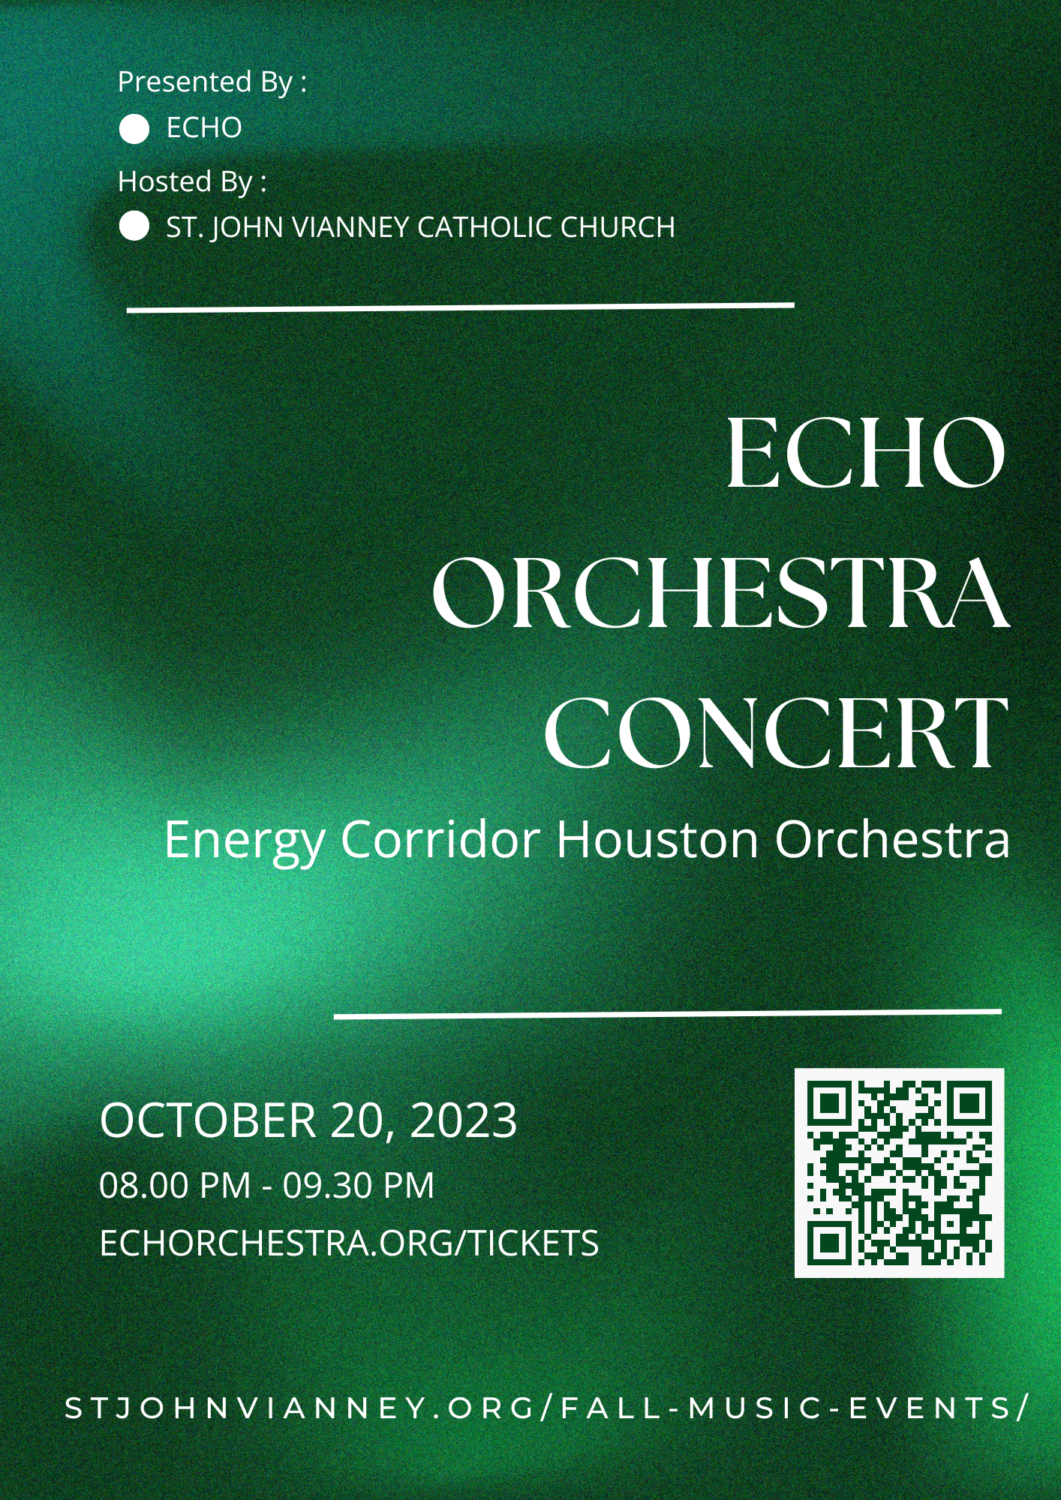 ECHO Orchestra Concert - Music of Faith